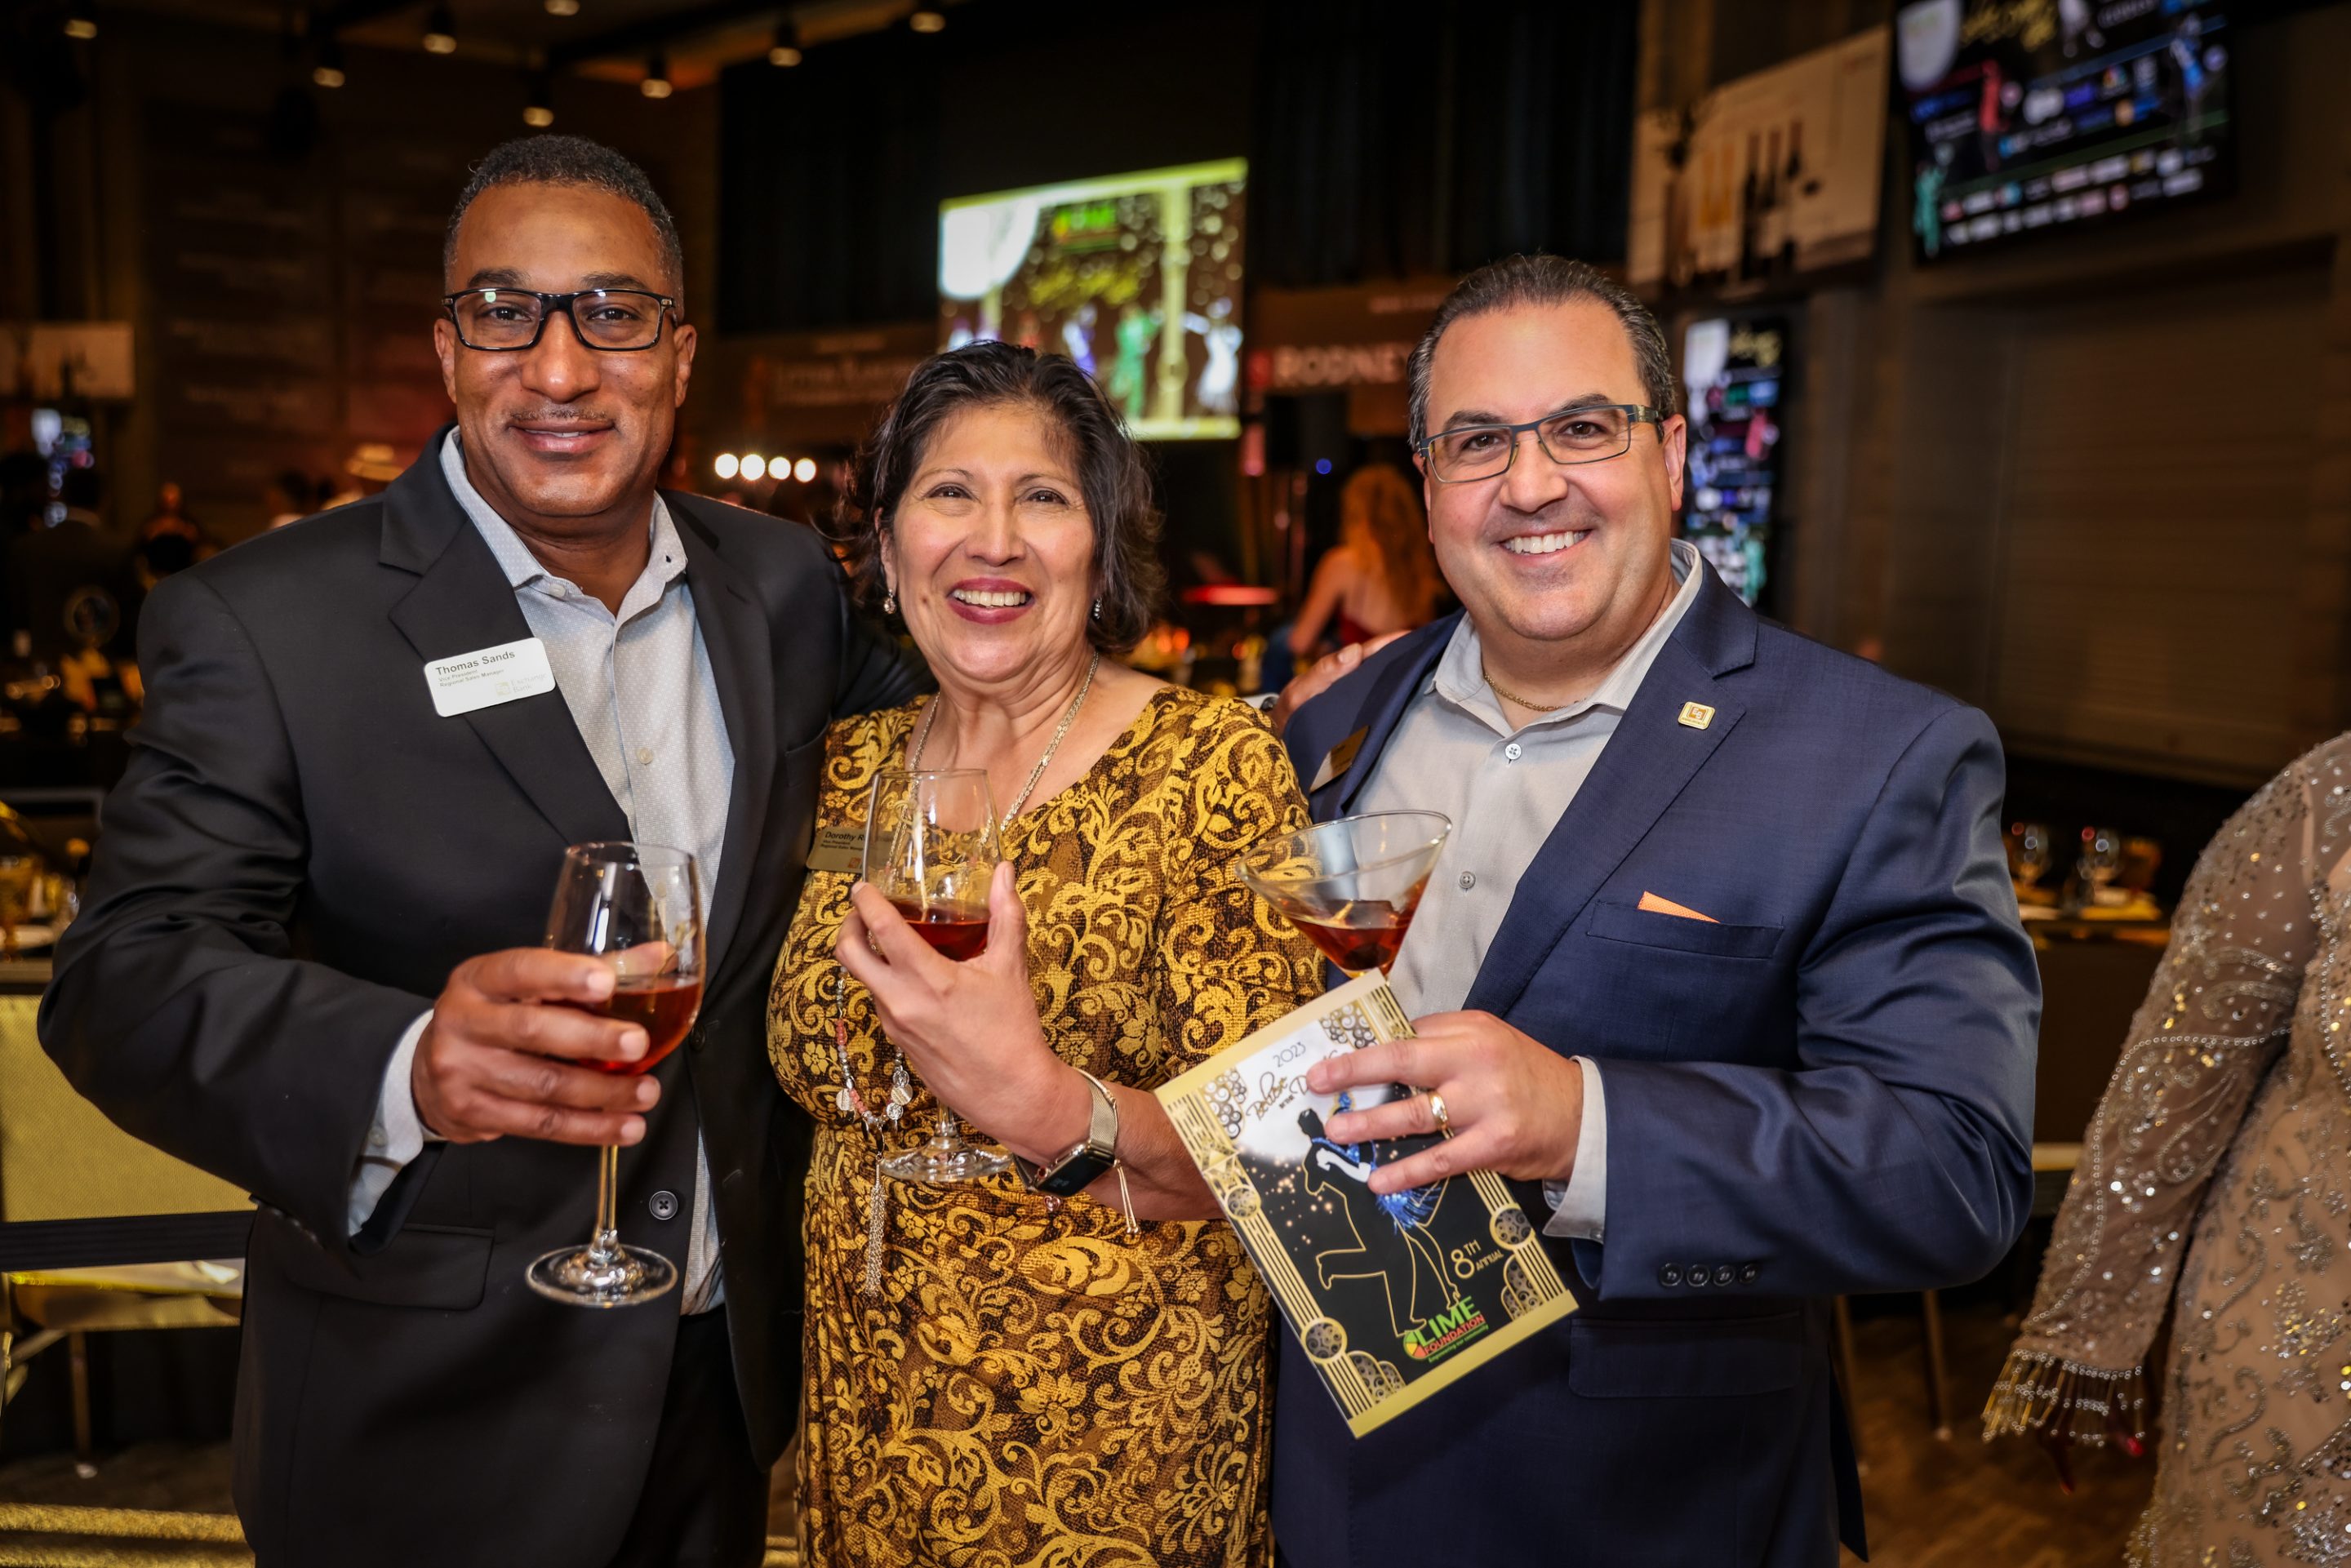 Three people from The LIME Foundation of Santa Rosa holding glasses of wine at an event.